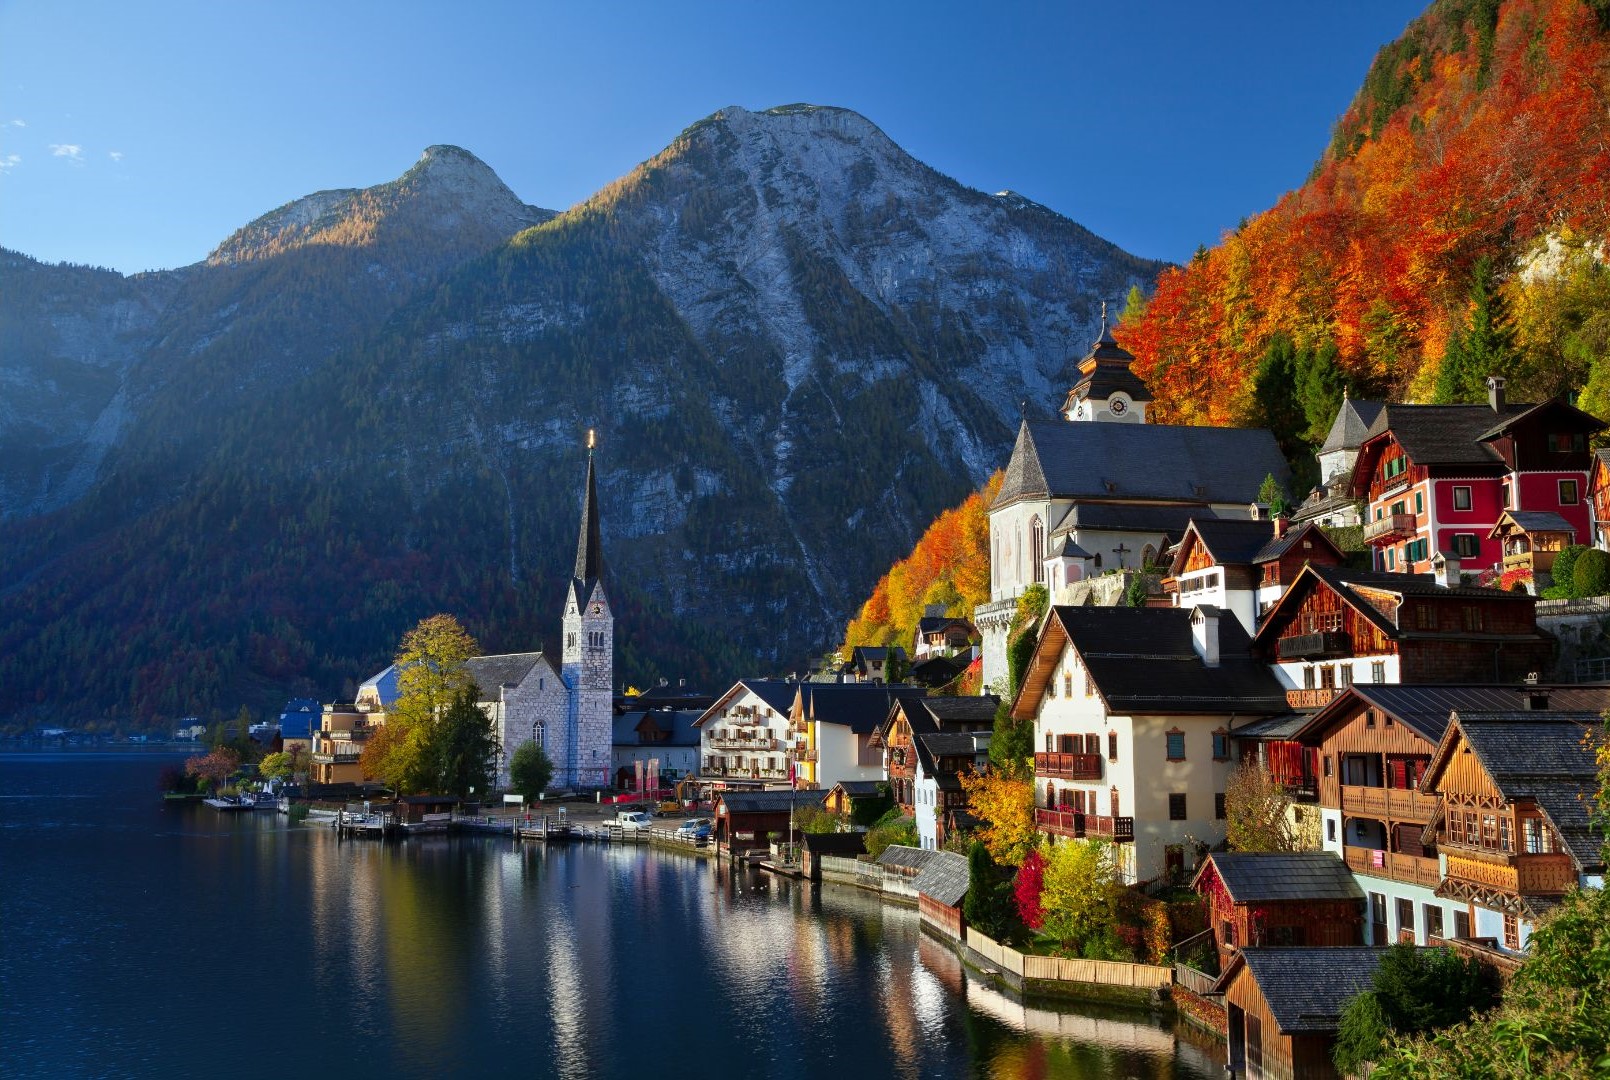 Austria with stunning Alpine scenery and outdoor escapades.